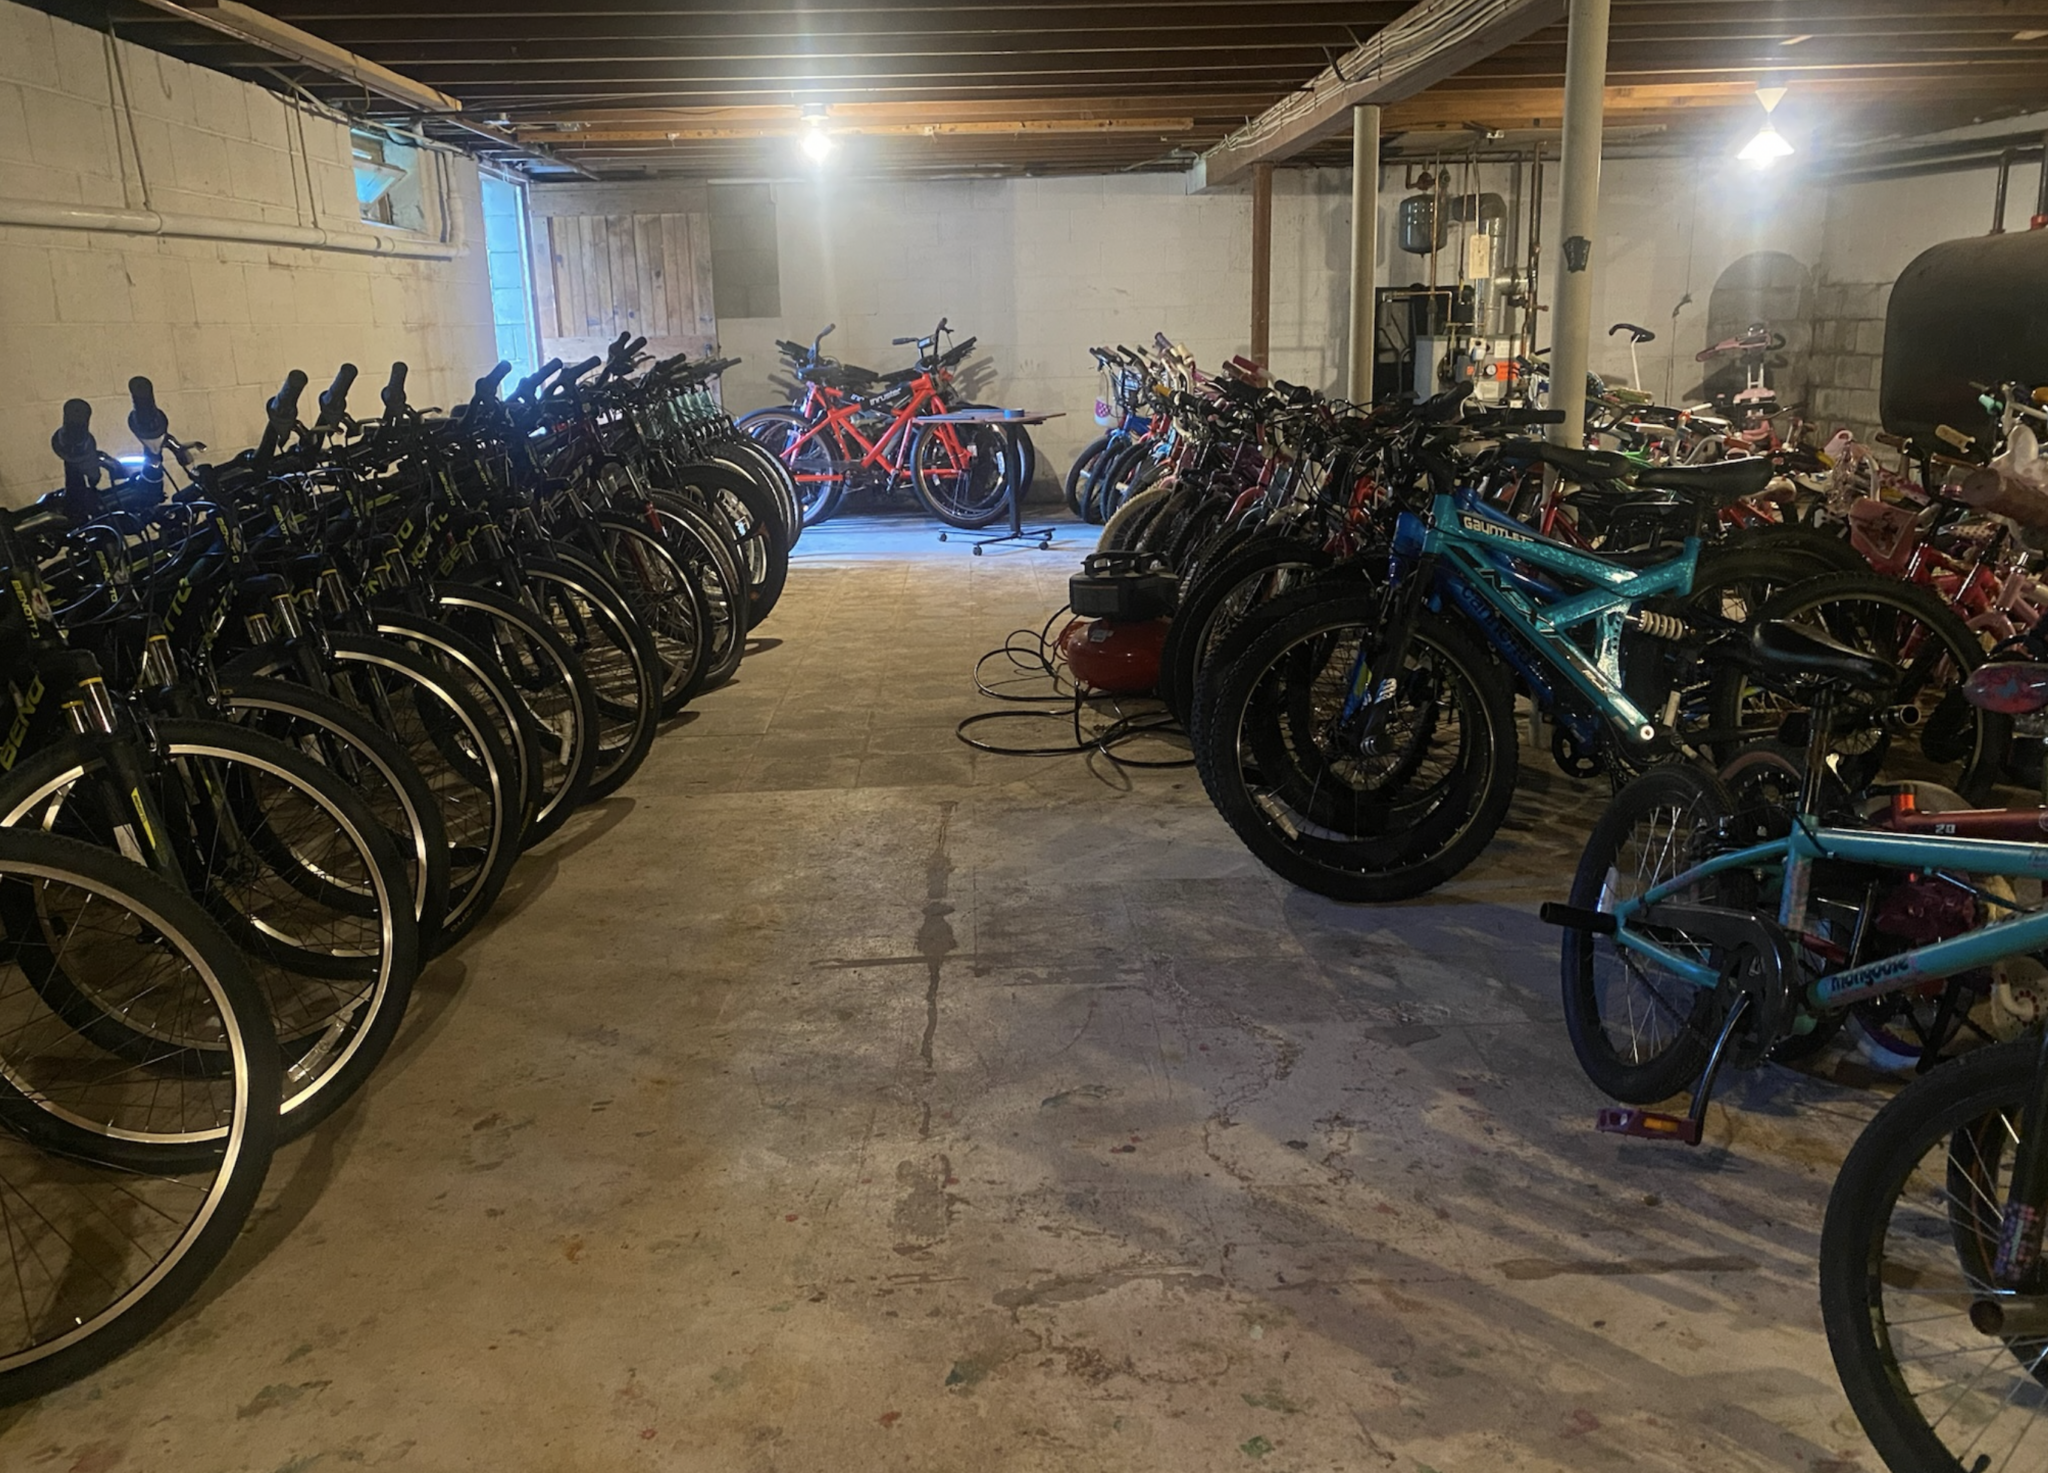 Bikes lined up in the basement of HQ